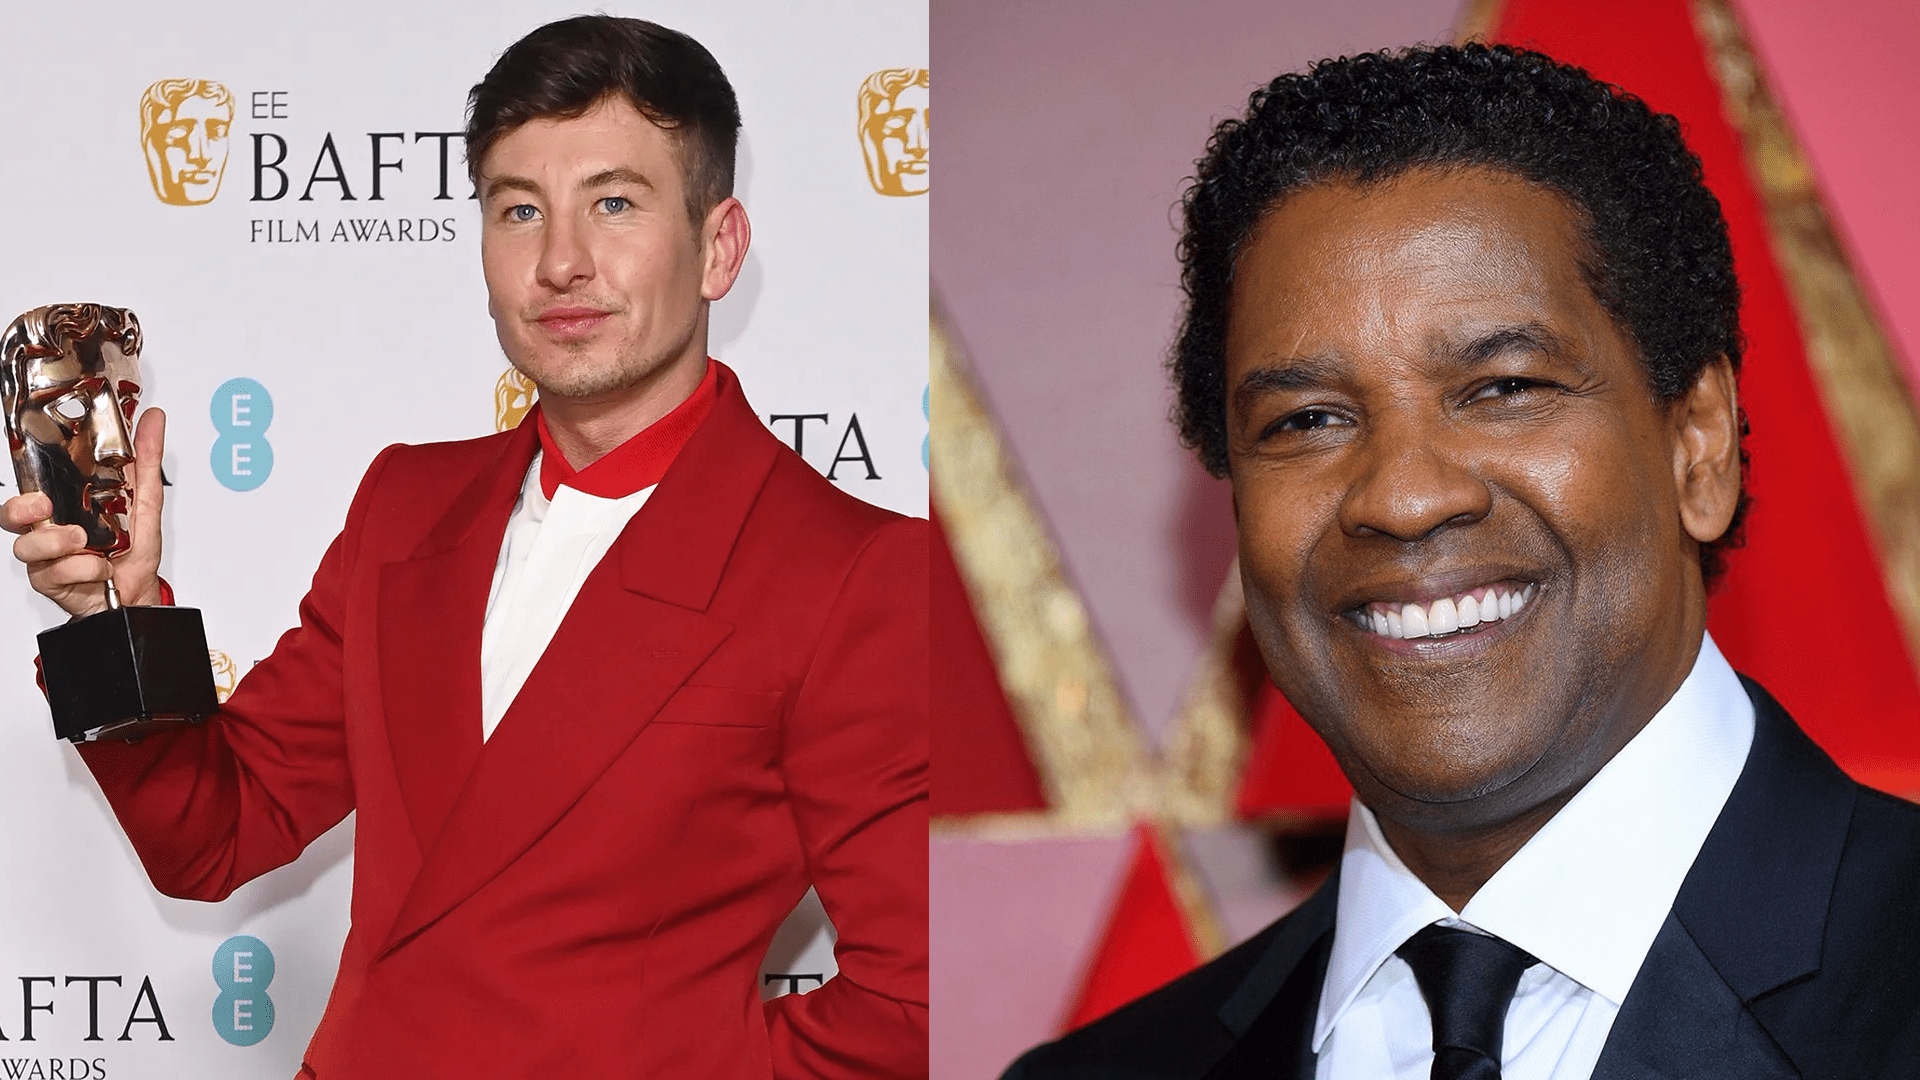 UPDATE: Barry Keoghan and Denzel Washington in Talks for ‘Gladiator’ Sequel